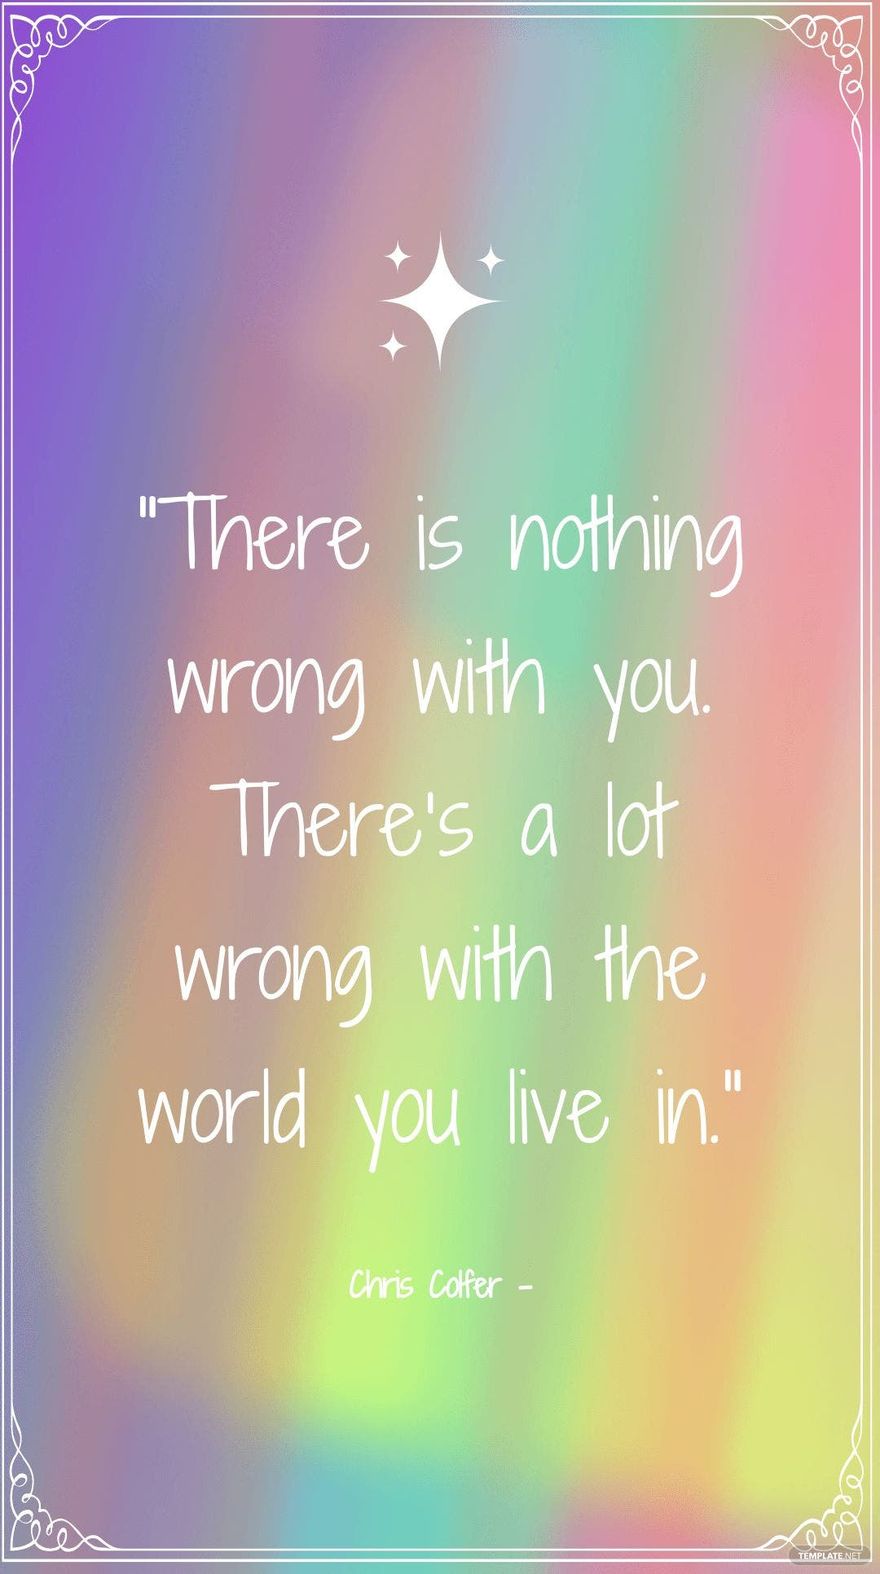 Chris Colfer - There is nothing wrong with you. There’s a lot wrong with the world you live in. in JPG